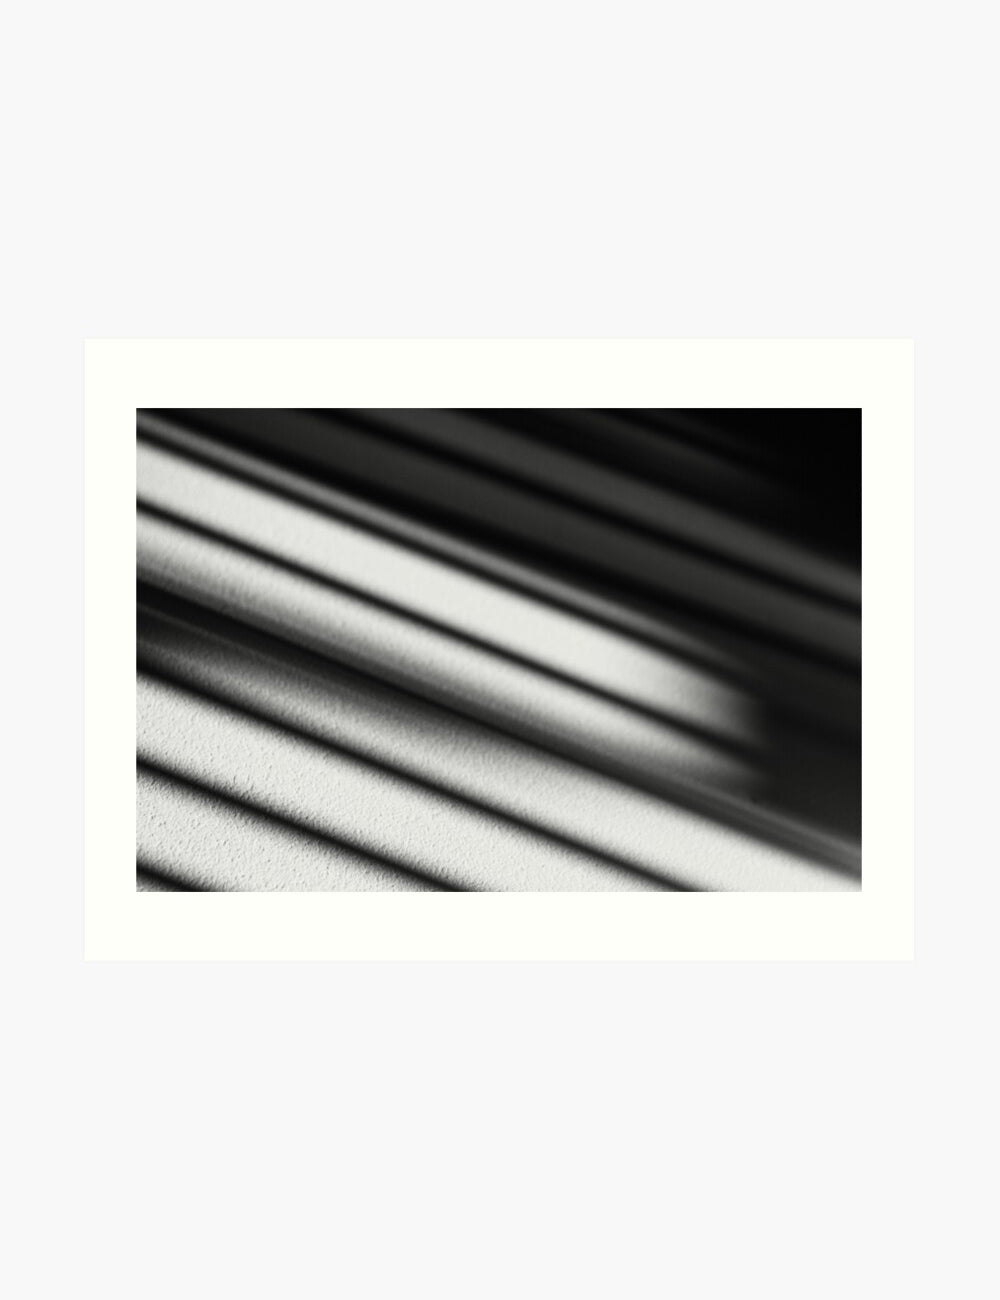 LIGHT AND SHADOW. Black and white photography. Abstract, minimalist printable wall art. LIGHT AND SHADOW art print. - PAPER MOON Art & Design